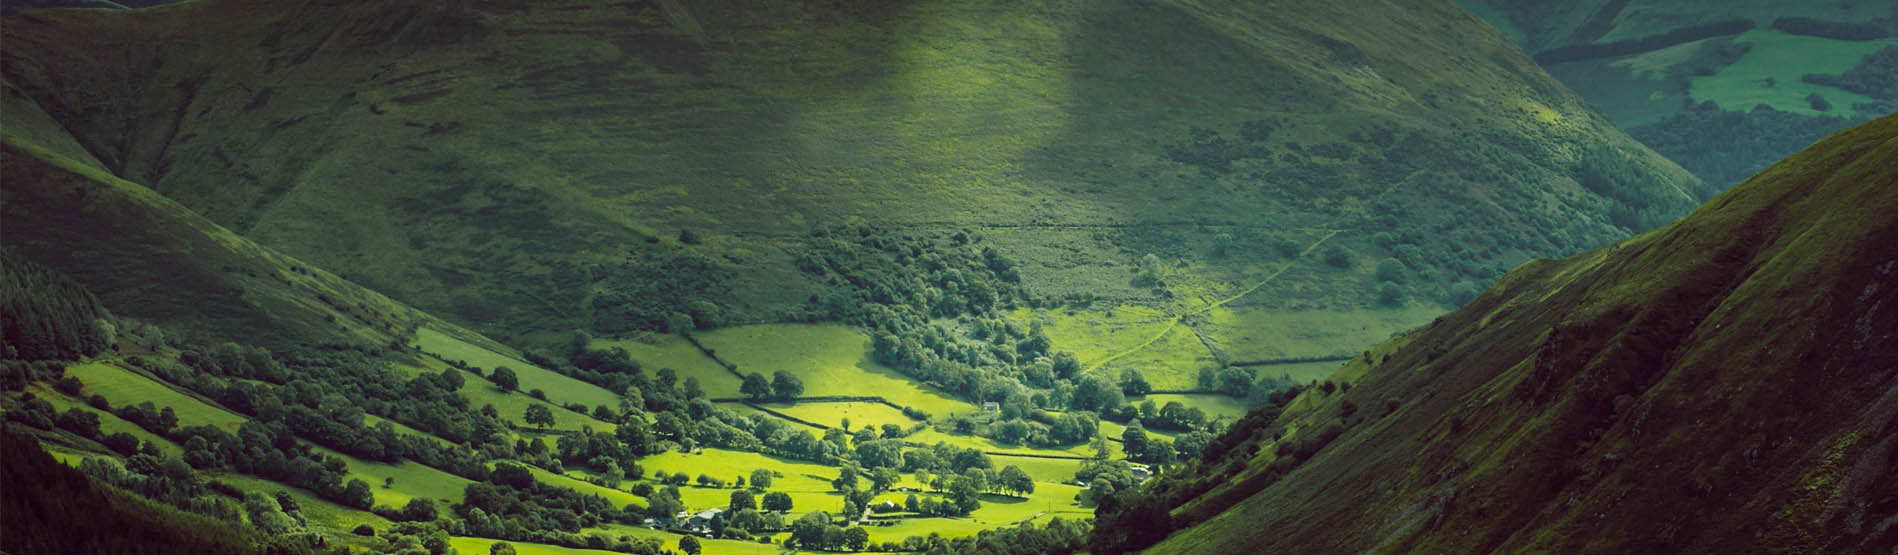 Image of green mountains in Wales 